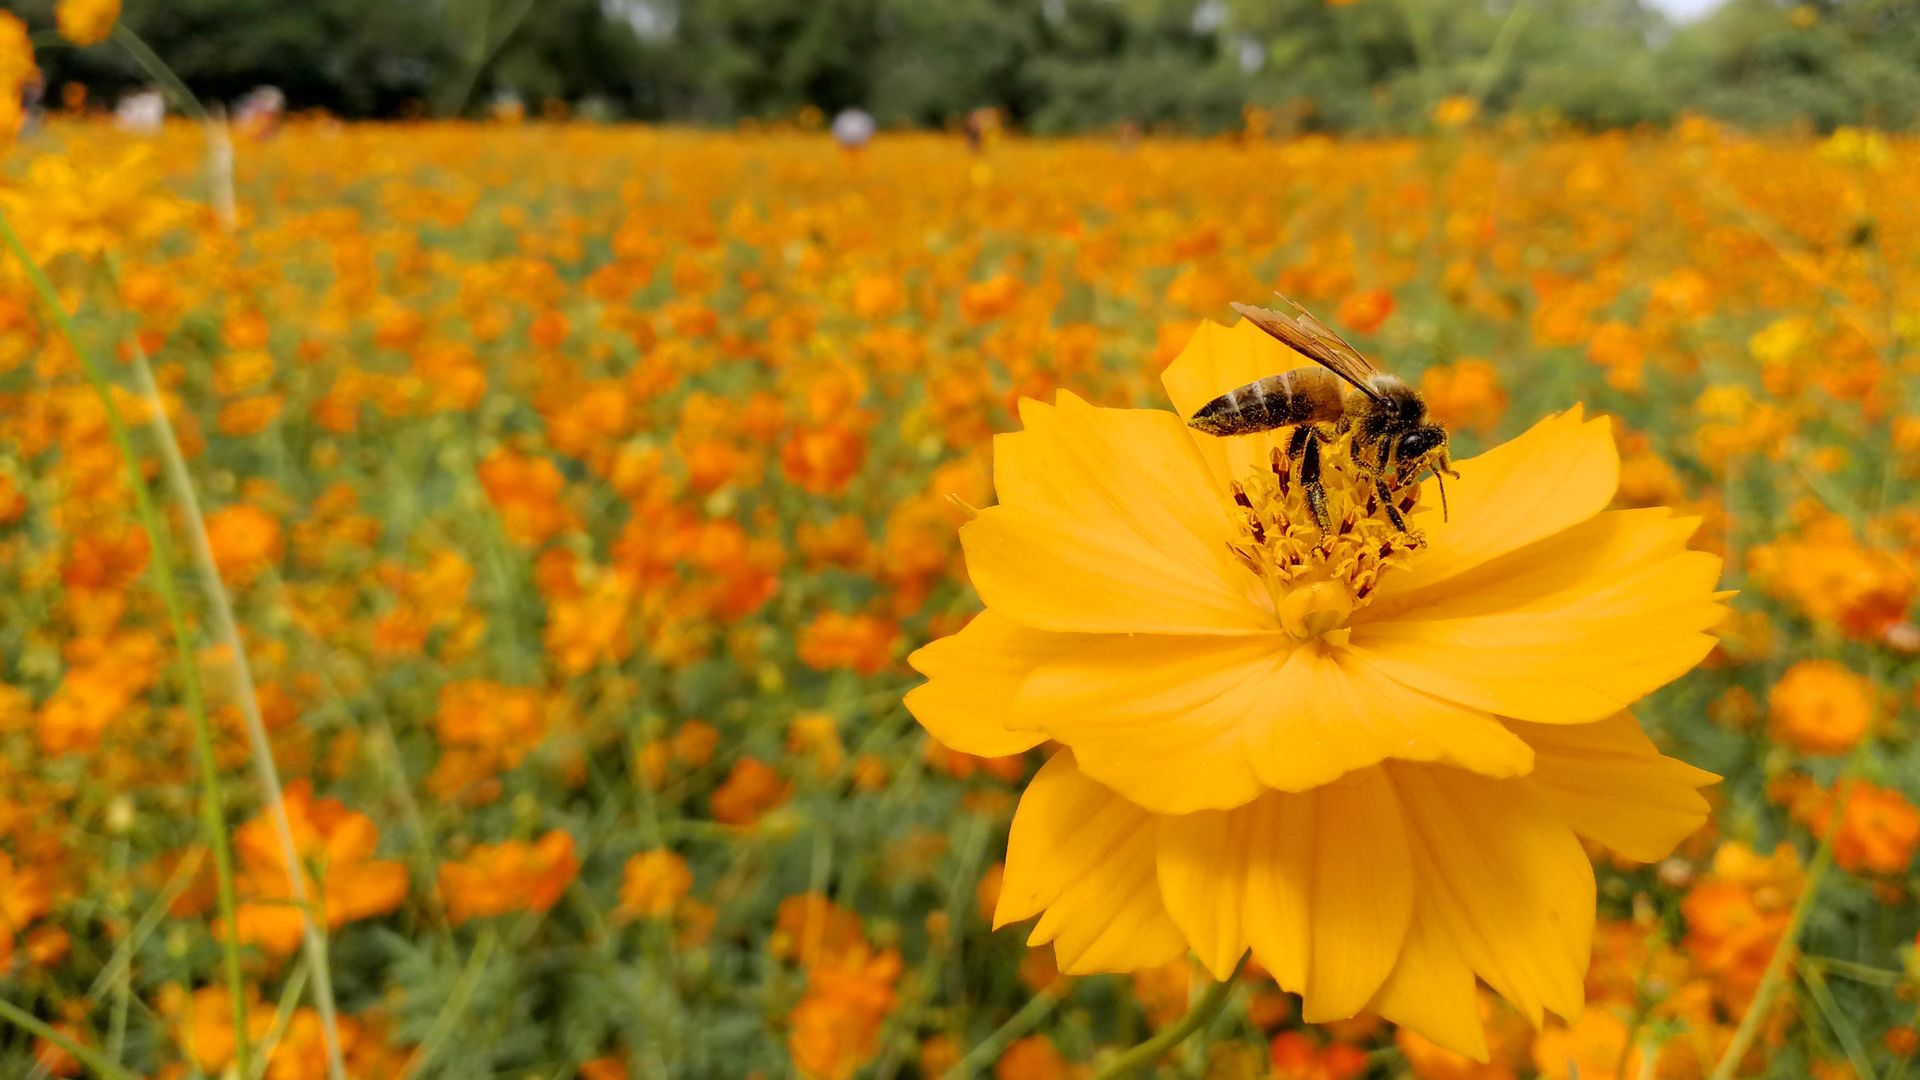 Image of a wildflower meadow with bees